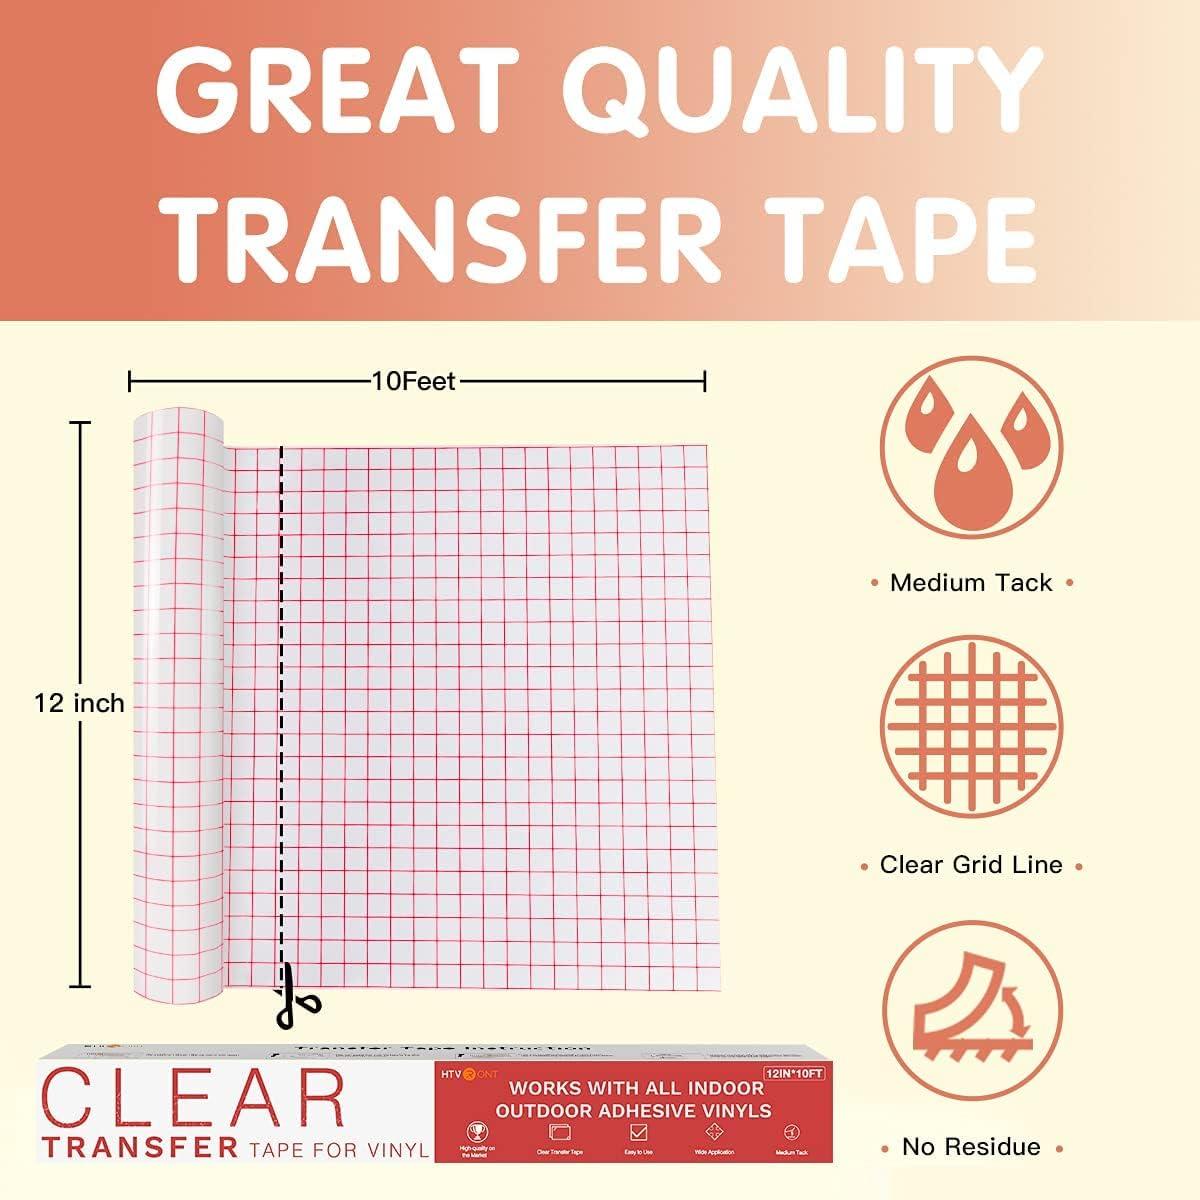 12 x 100' Roll of Clear Transfer Tape for Vinyl, Made in America, Vinyl Transfer Tape with Alignment Grid for Cricut Crafts, Decals, and Letters